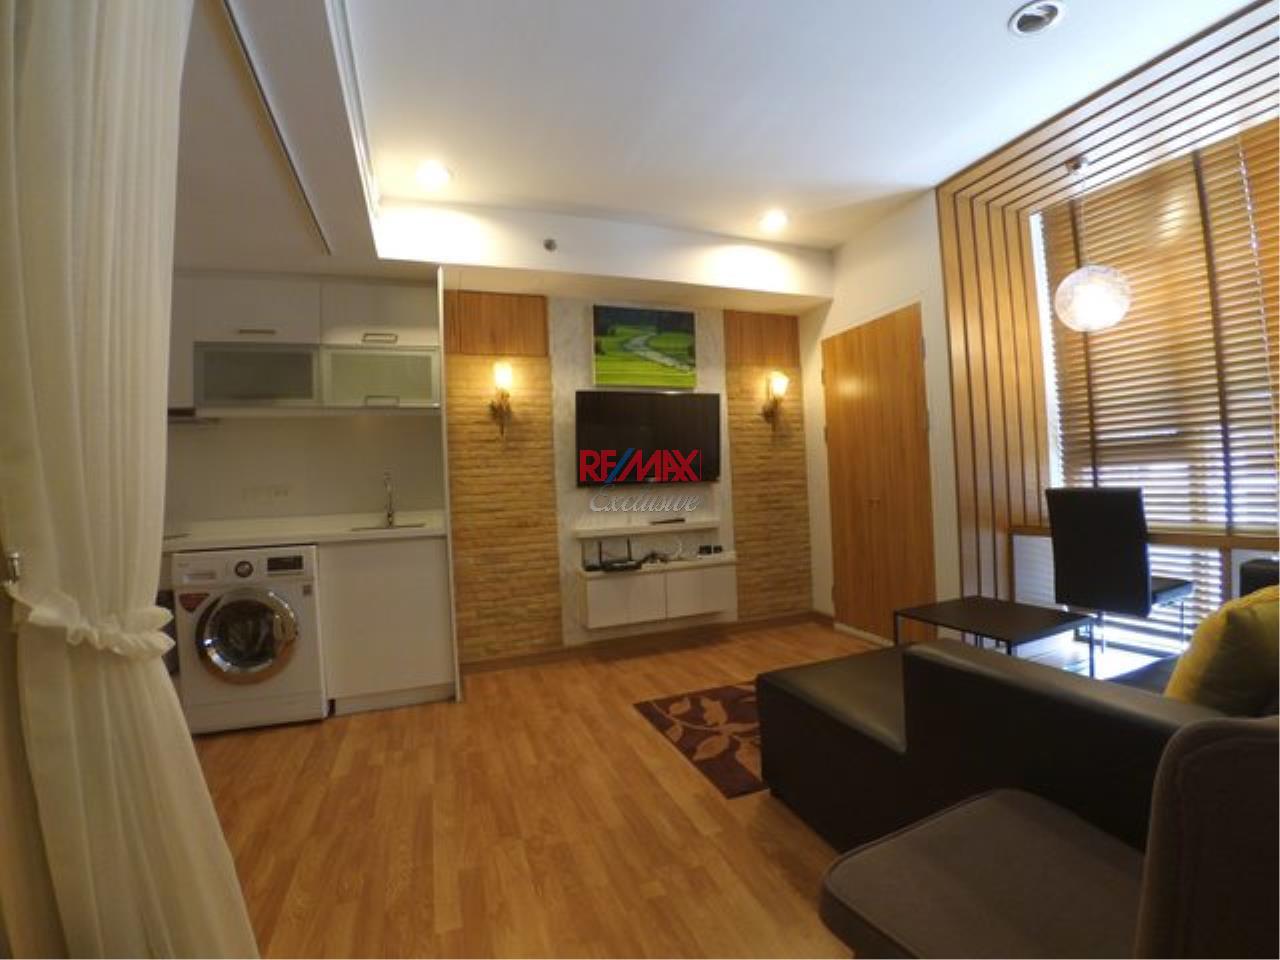 RE/MAX Exclusive Agency's THE ALCOVE, Thonglor 10, 44 Sqm., 1 Bedroom, Fully-Furnished, Fully Equipped Kitchen For RENT !!!! 10